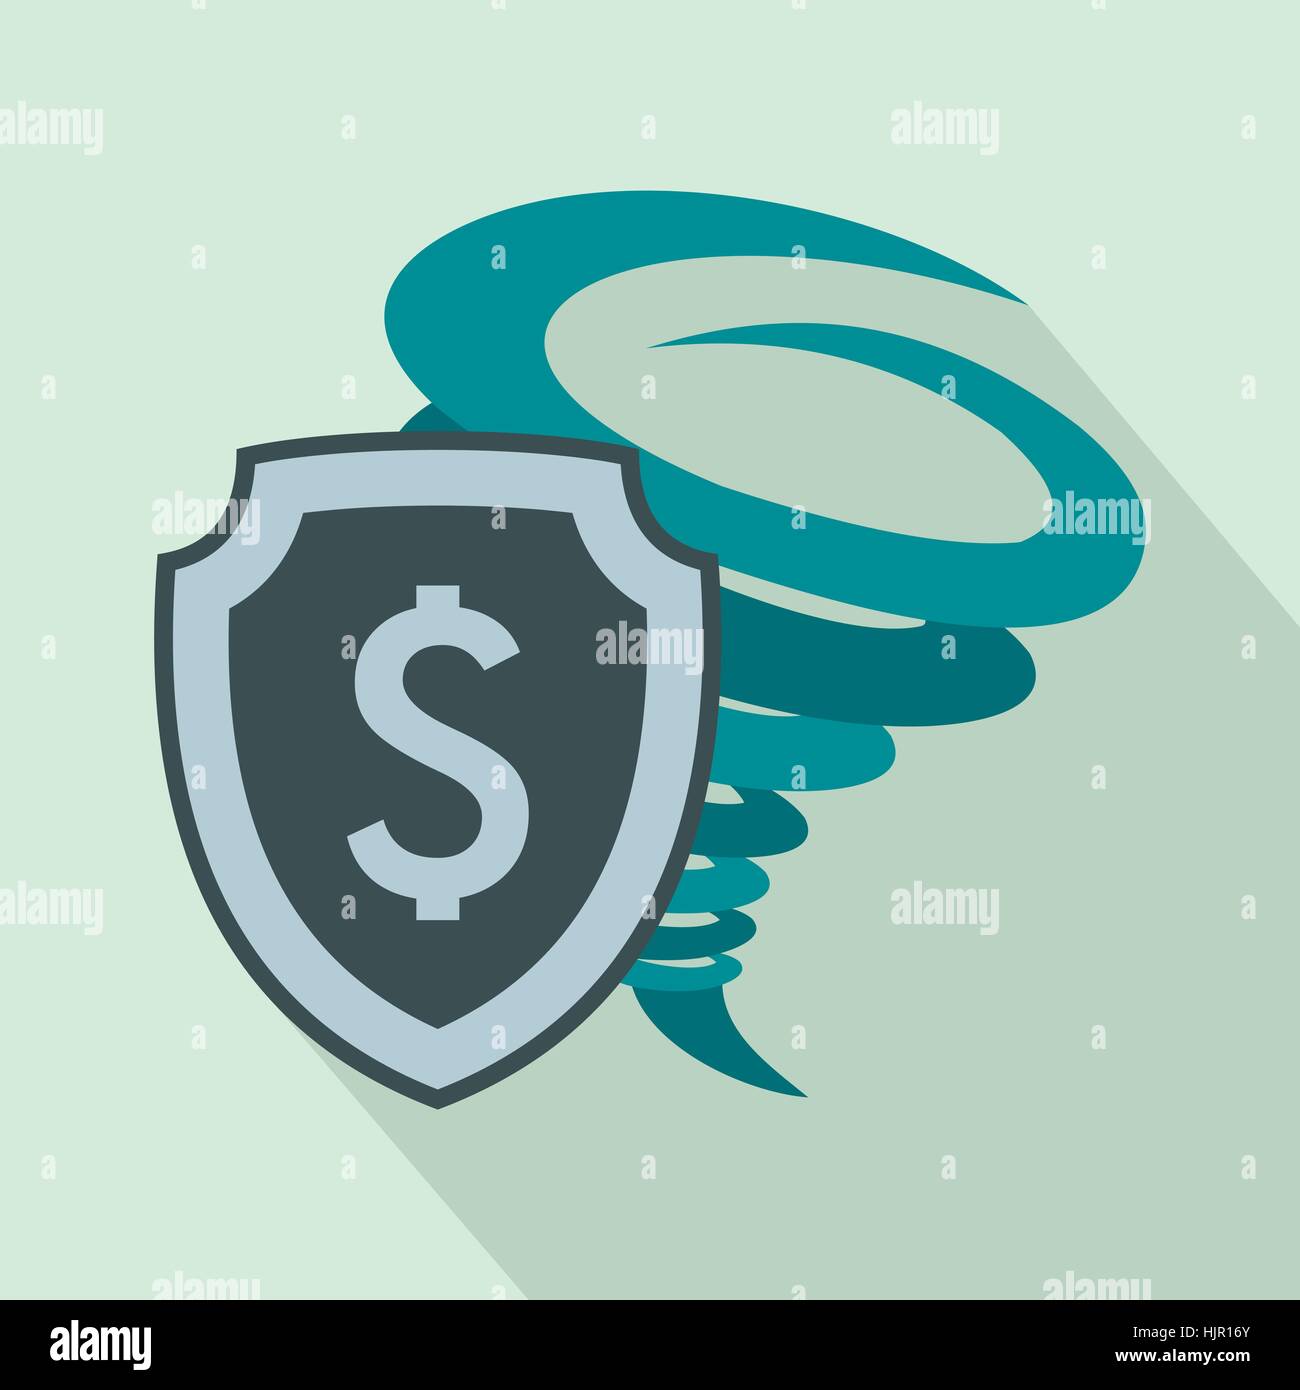 Hurricane insurance icon in flat style on a light blue background Stock Vector